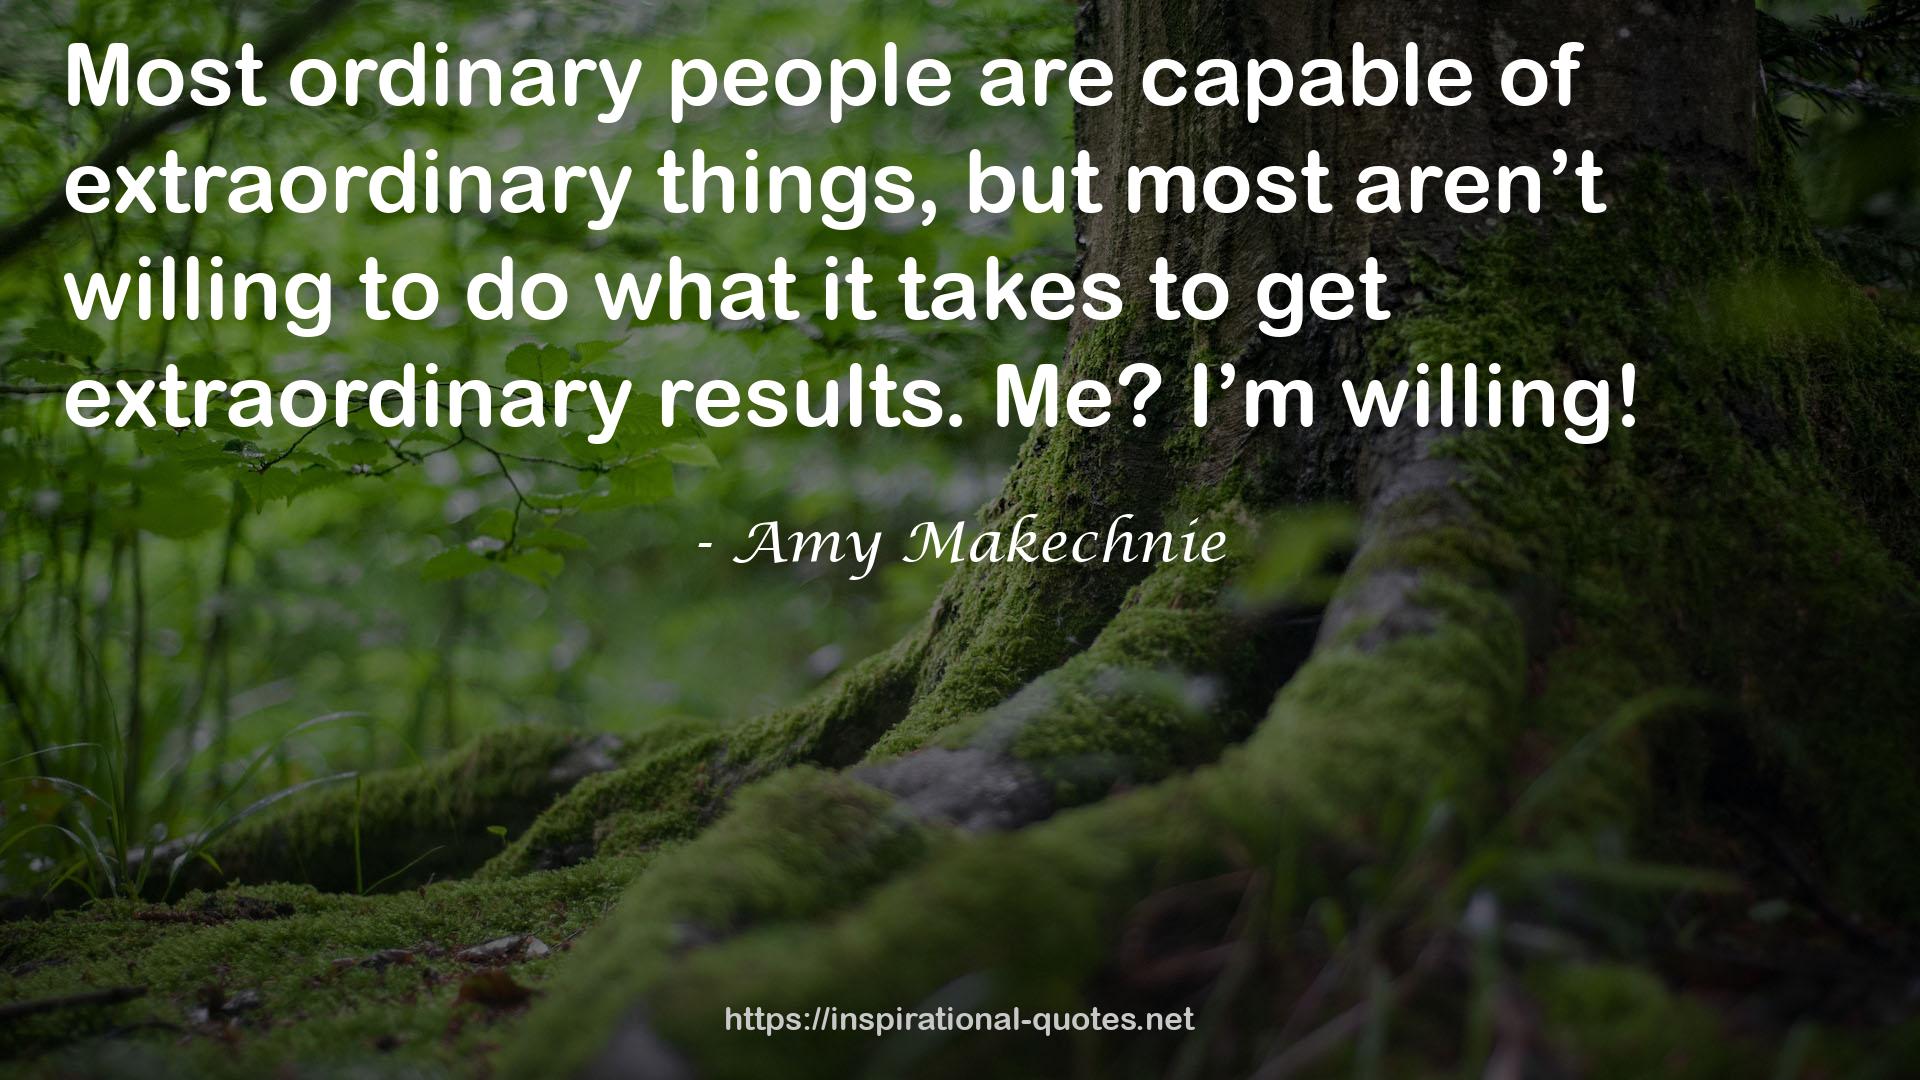 Amy Makechnie QUOTES